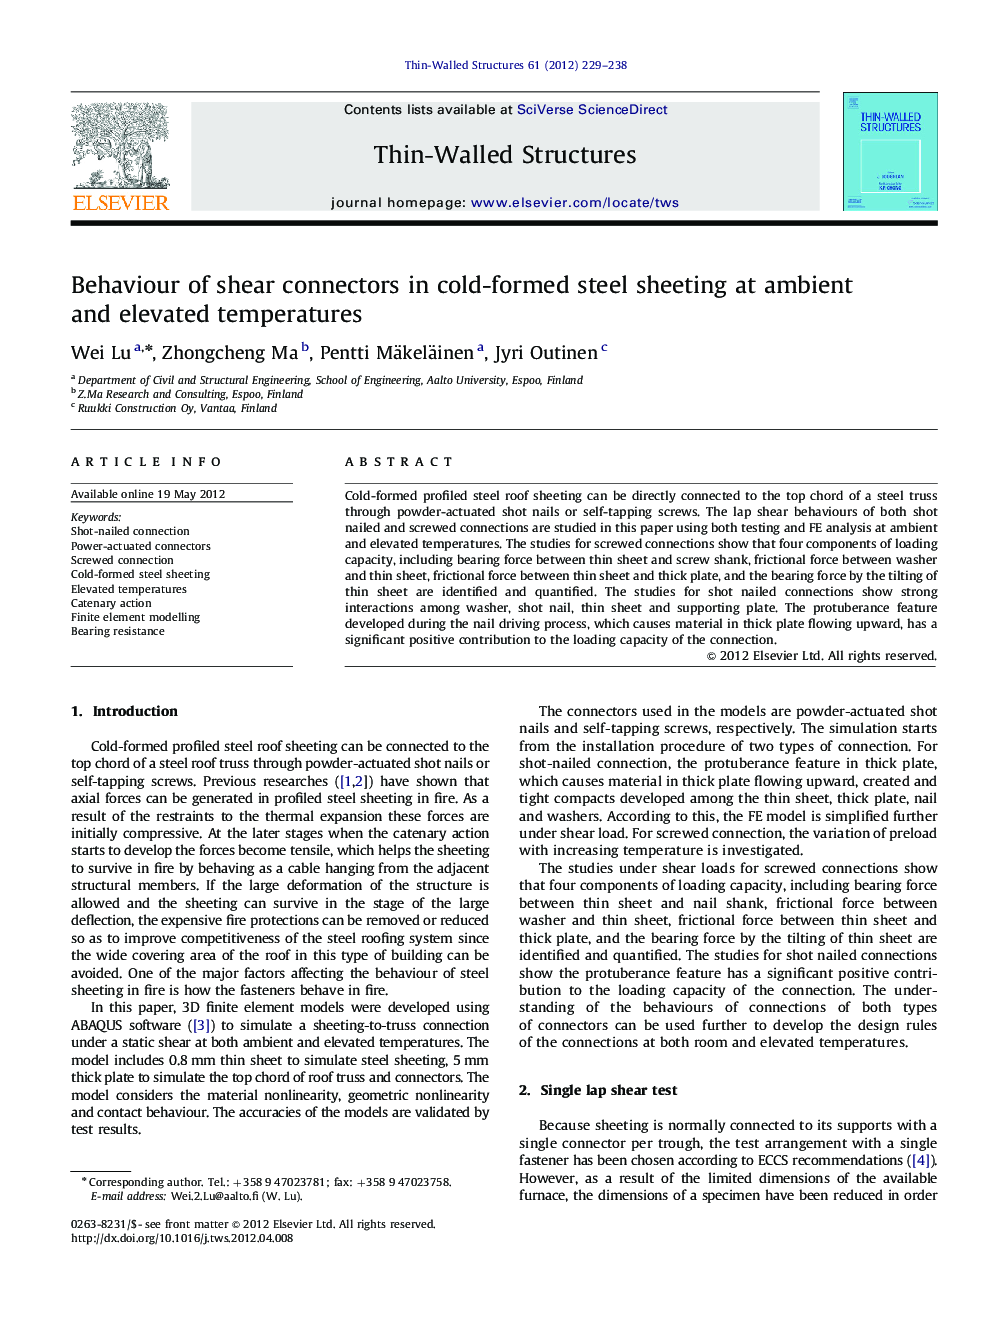 Behaviour of shear connectors in cold-formed steel sheeting at ambient and elevated temperatures